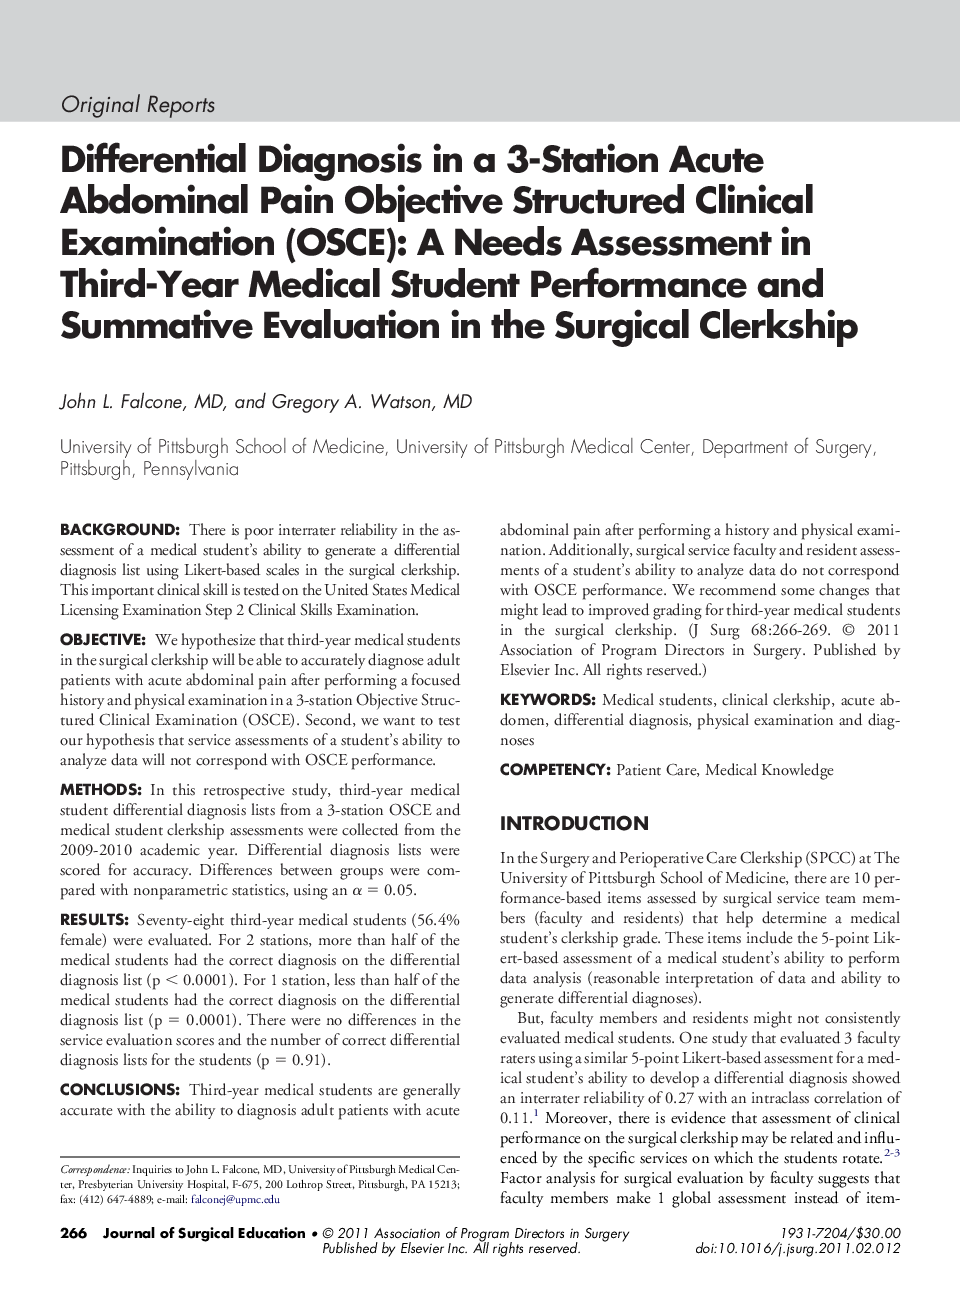 Differential Diagnosis in a 3-Station Acute Abdominal Pain Objective Structured Clinical Examination (OSCE): A Needs Assessment in Third-Year Medical Student Performance and Summative Evaluation in the Surgical Clerkship